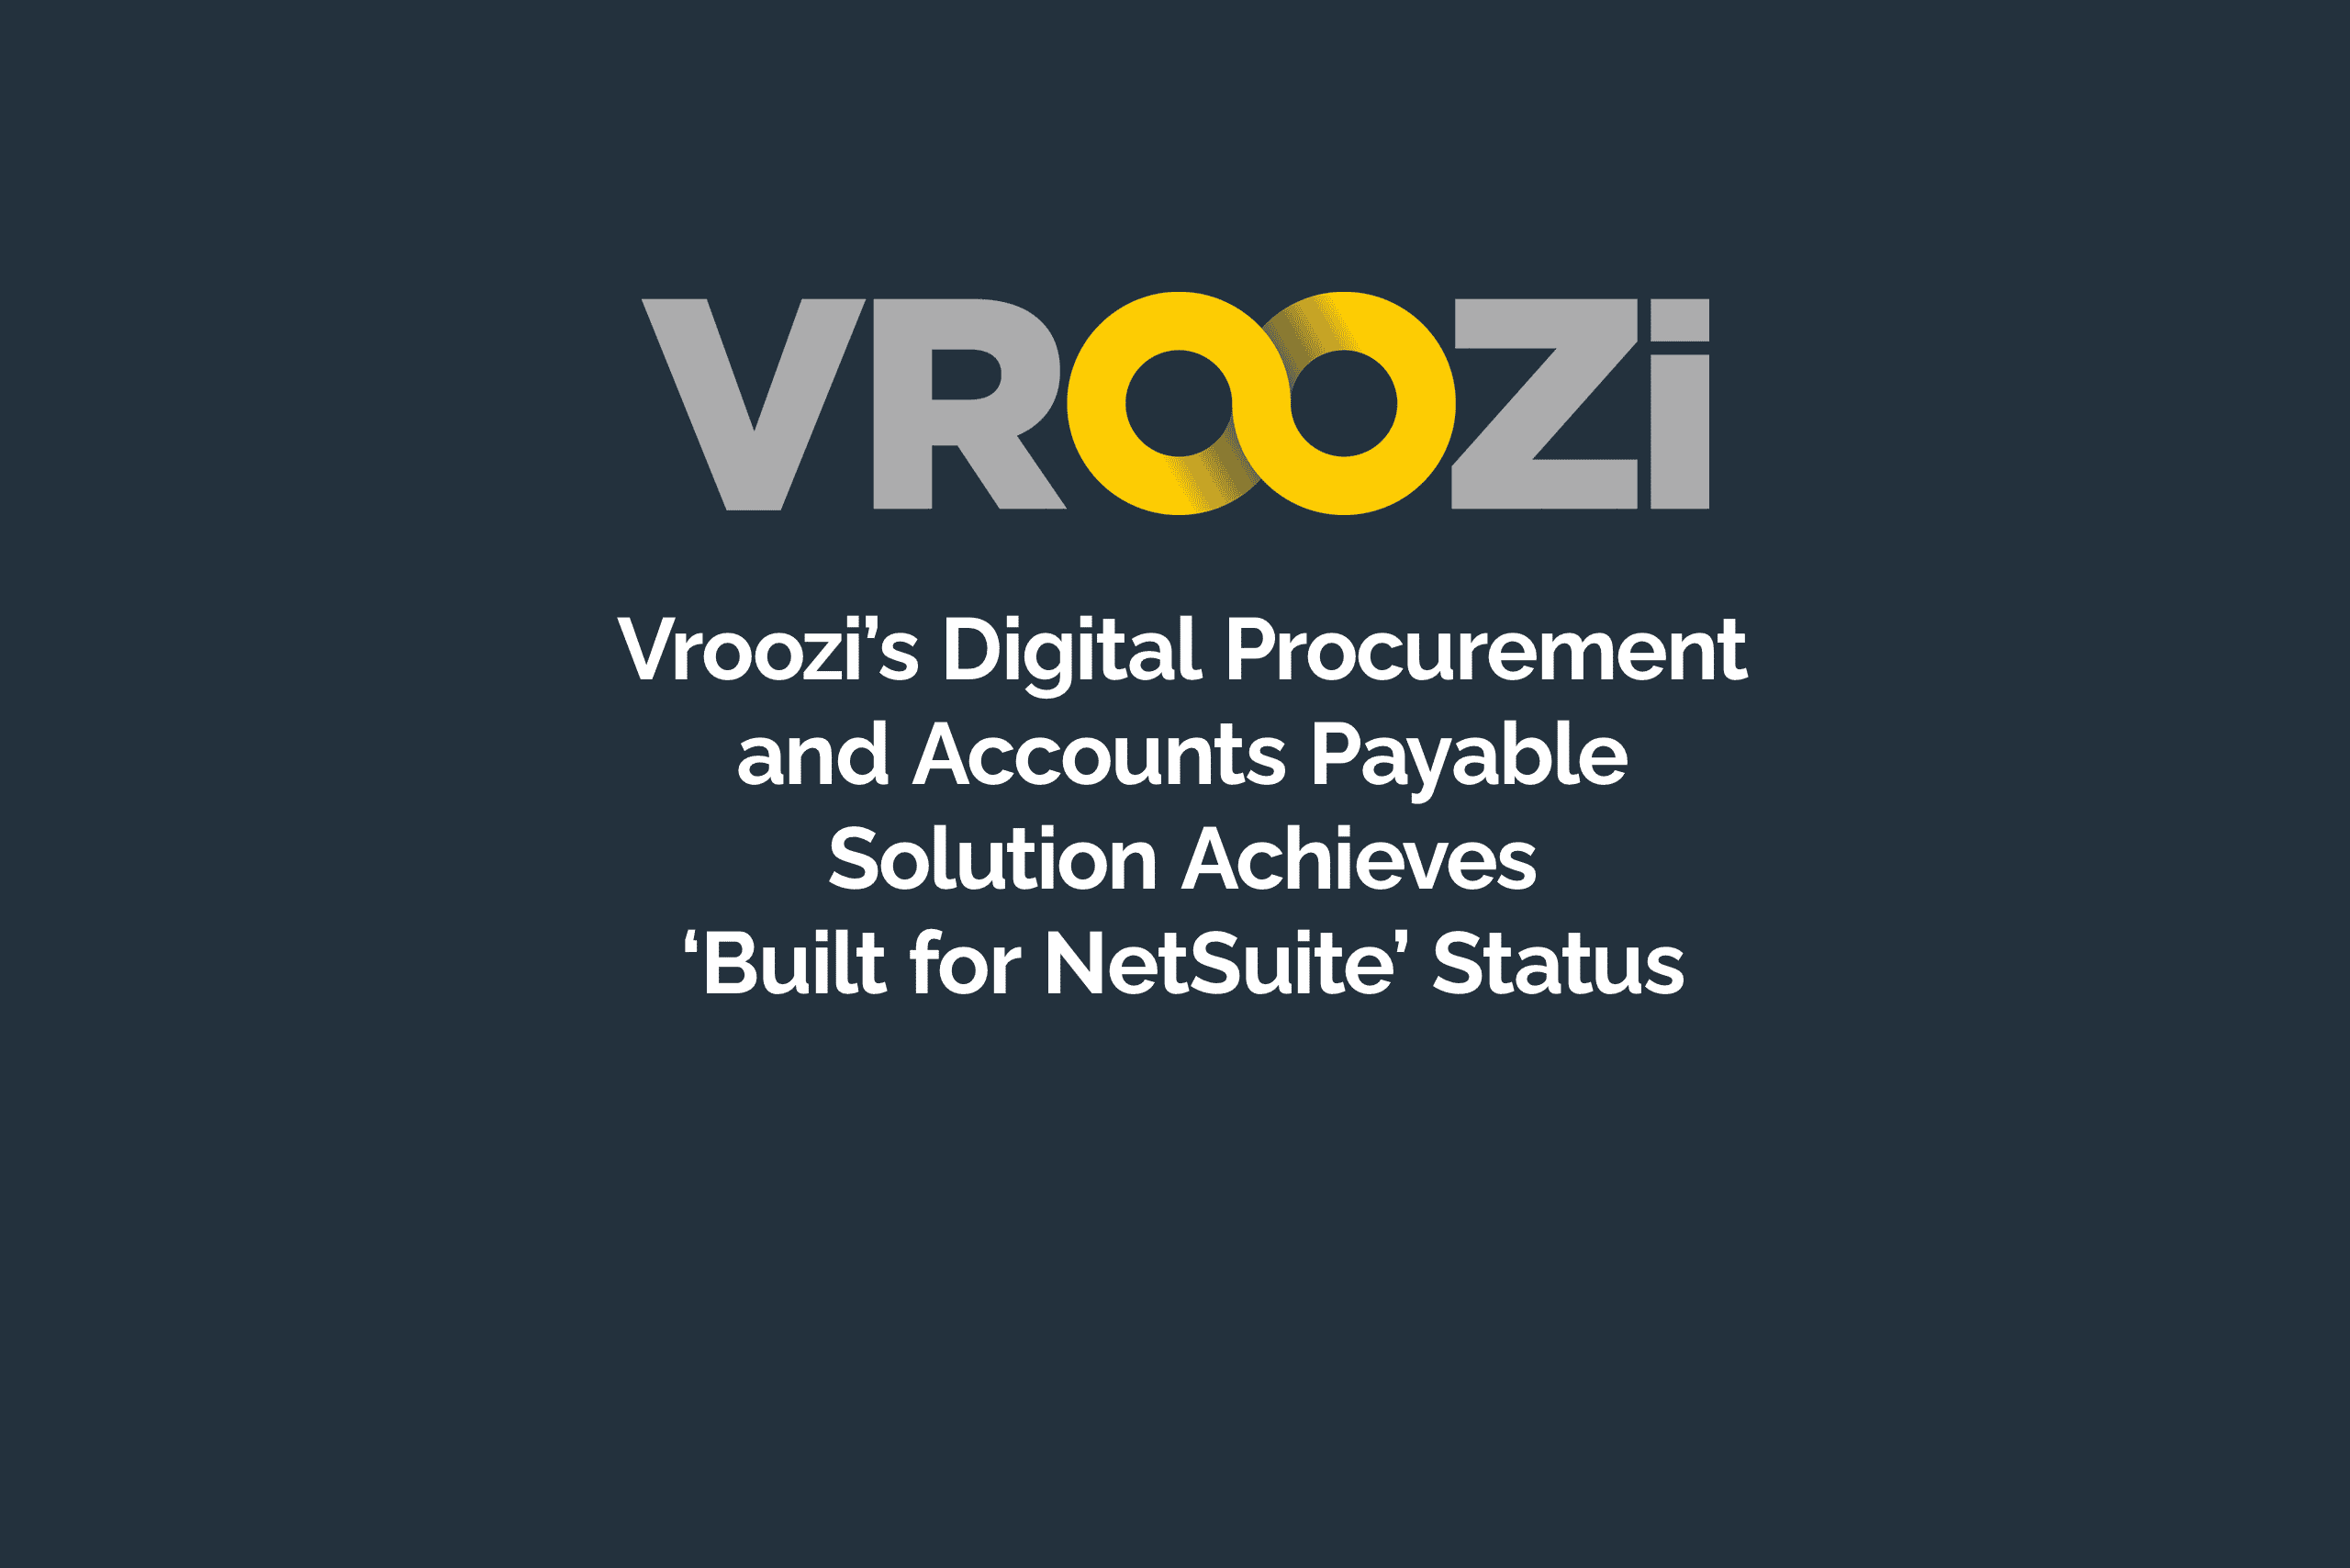 Vroozi’s Digital Procurement and Accounts Payable Solution Achieves ‘Built for NetSuite’ Status